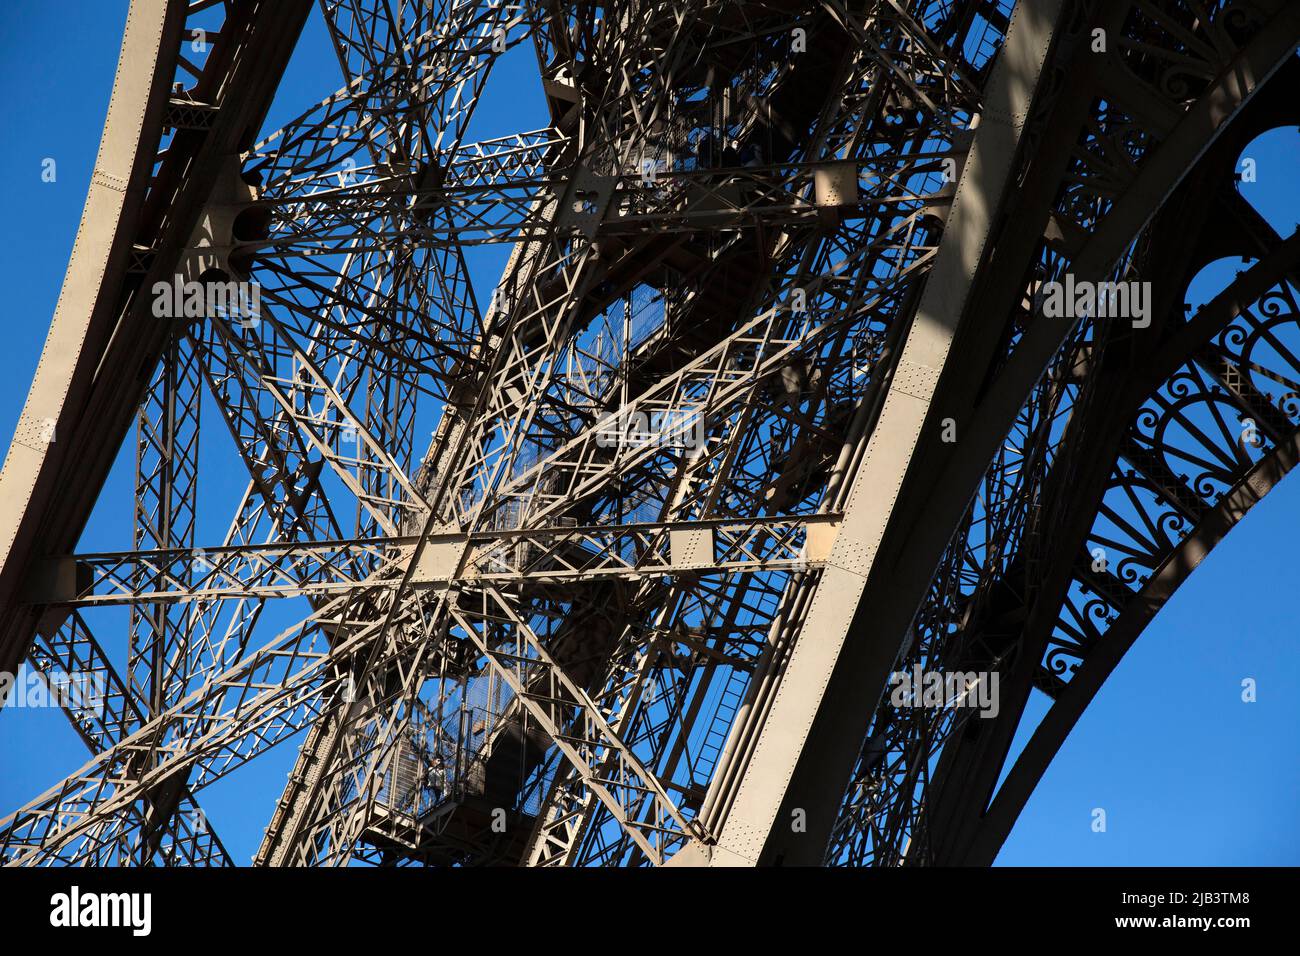 The Eiffel Tower in Paris, France on February 28, 2022. The Eiffel Tower (Tour Eiffel in French) is a wrought-iron lattice tower on the Champ de Mars in Paris. It is named after the engineer Gustave Eiffel, whose company designed and built the tower. The Eiffel Tower  has become a global cultural icon of France and one of the most recognizable structures in the world. Photograph by Bénédicte Desrus Stock Photo